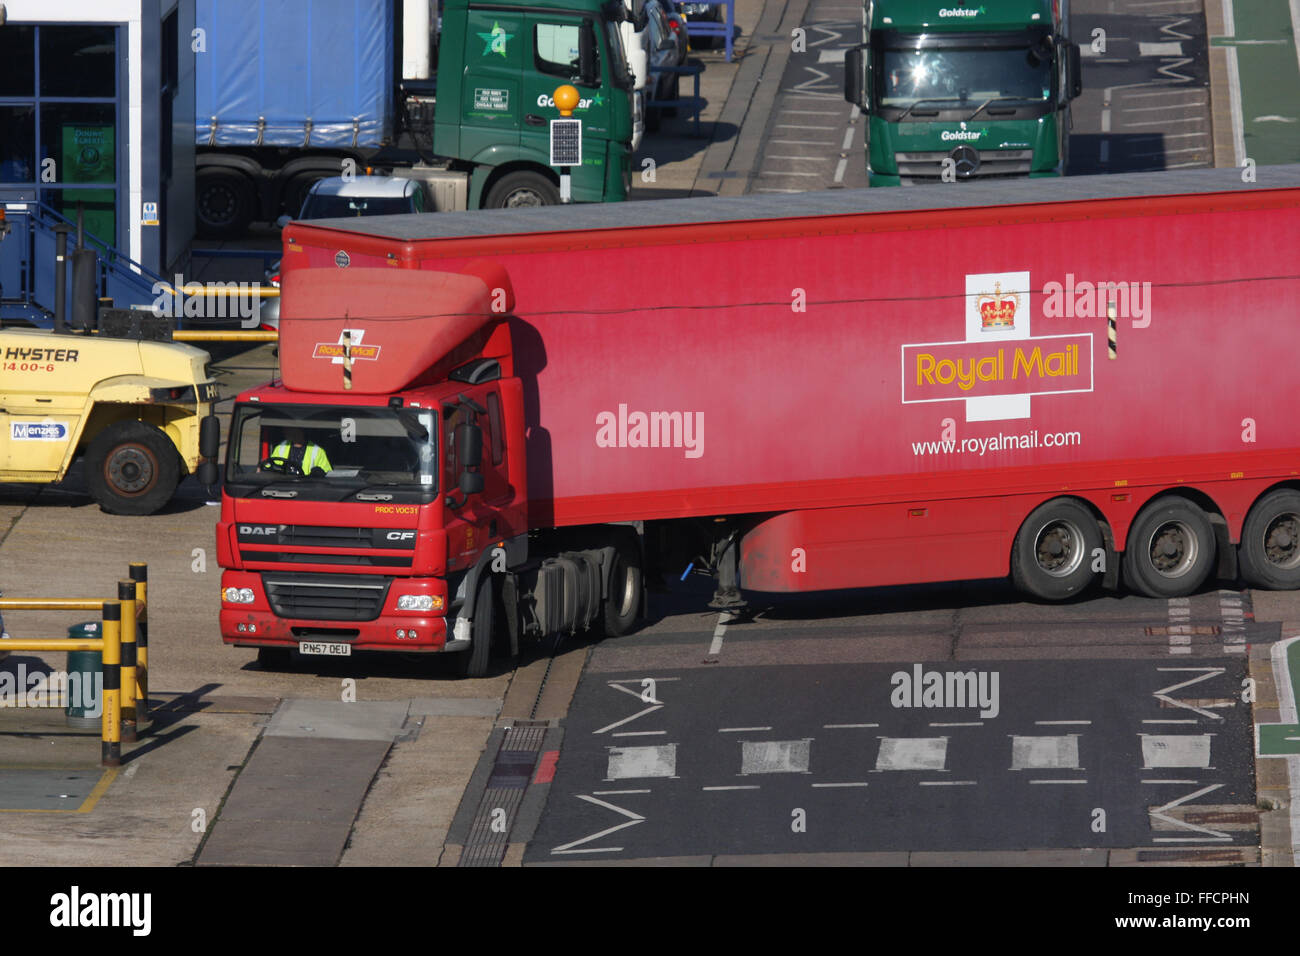 ROYAL MAIL ARTICULATED LORRY TRUCK Stock Photo